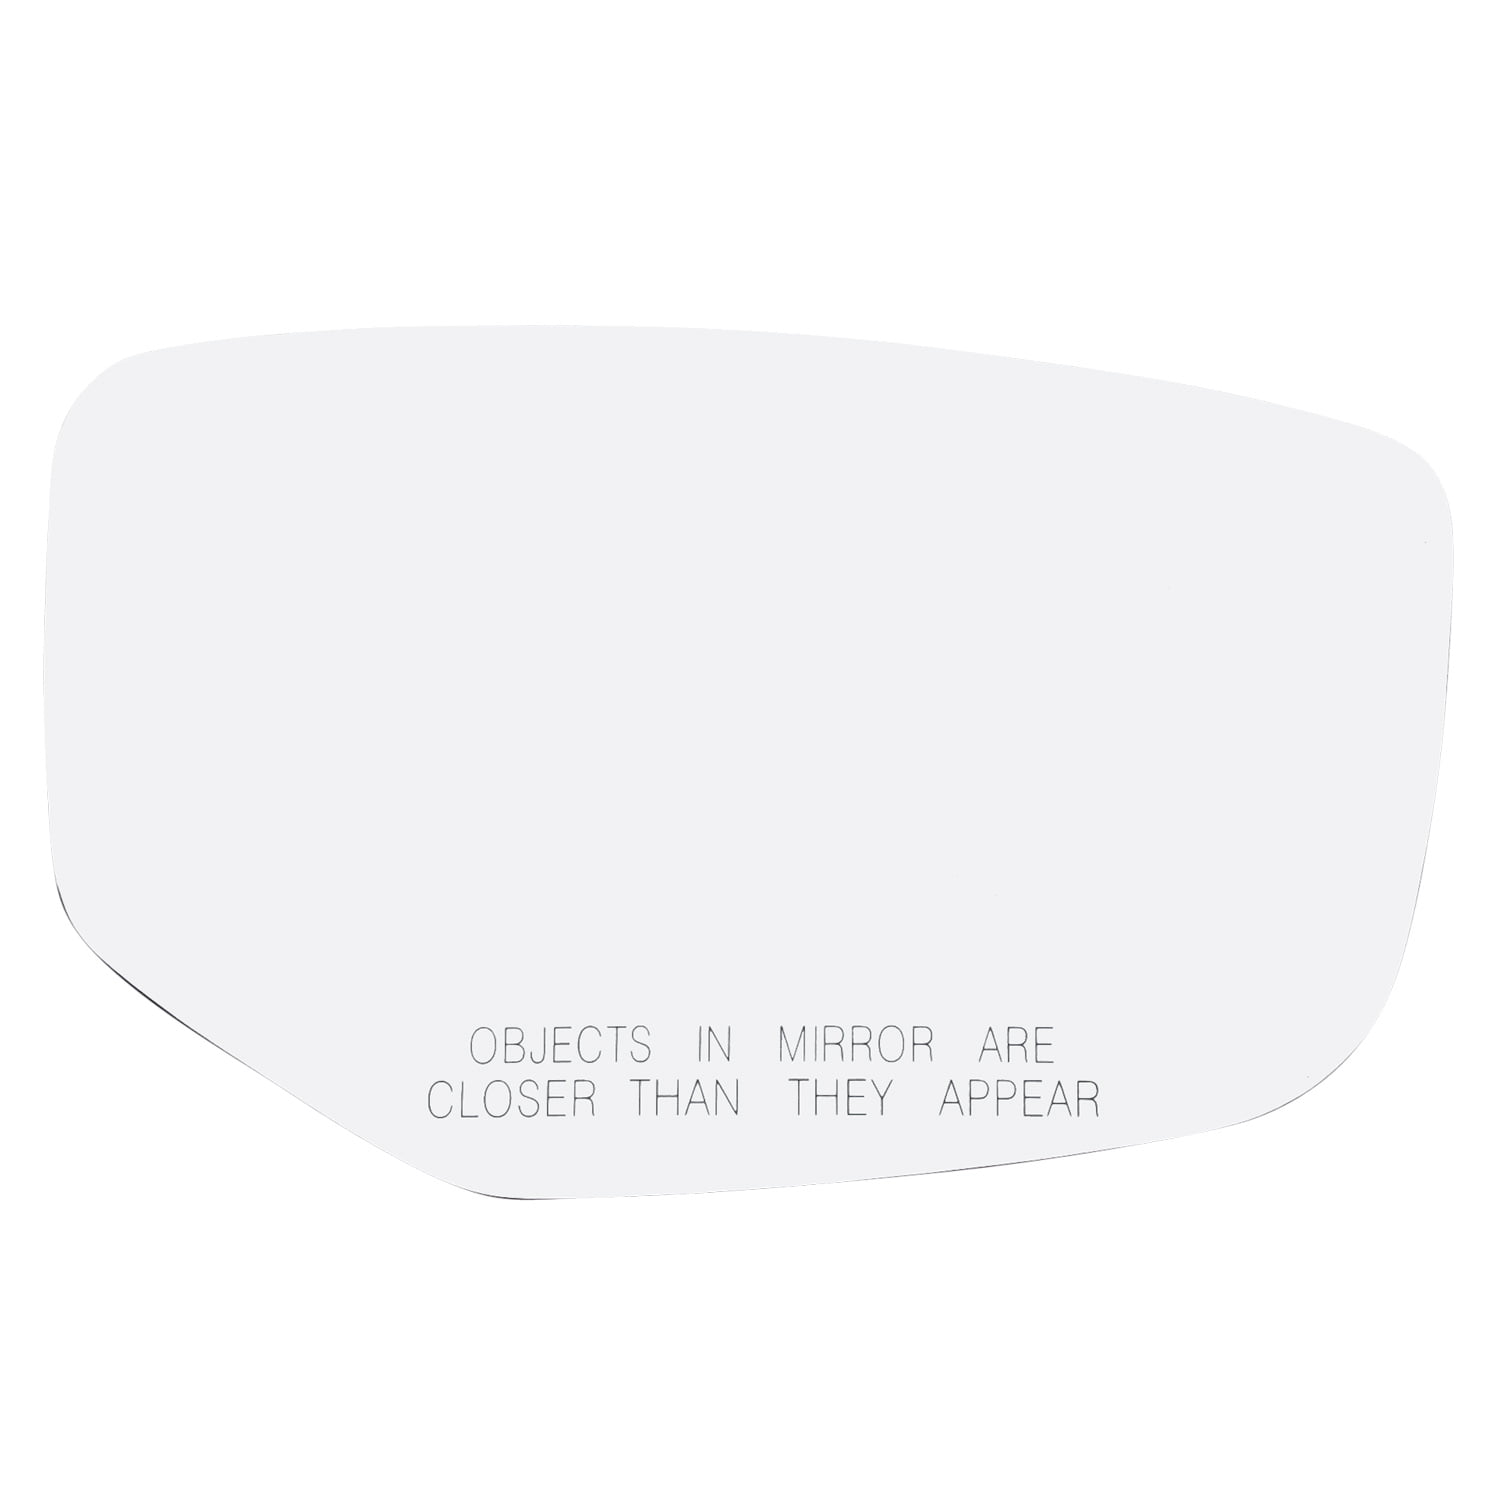 New Replacement Driver Side Mirror Glass W Backing Compatible With 2013 2014 2015 2016 2017 Honda Accord Sold By Rugged TUFF 